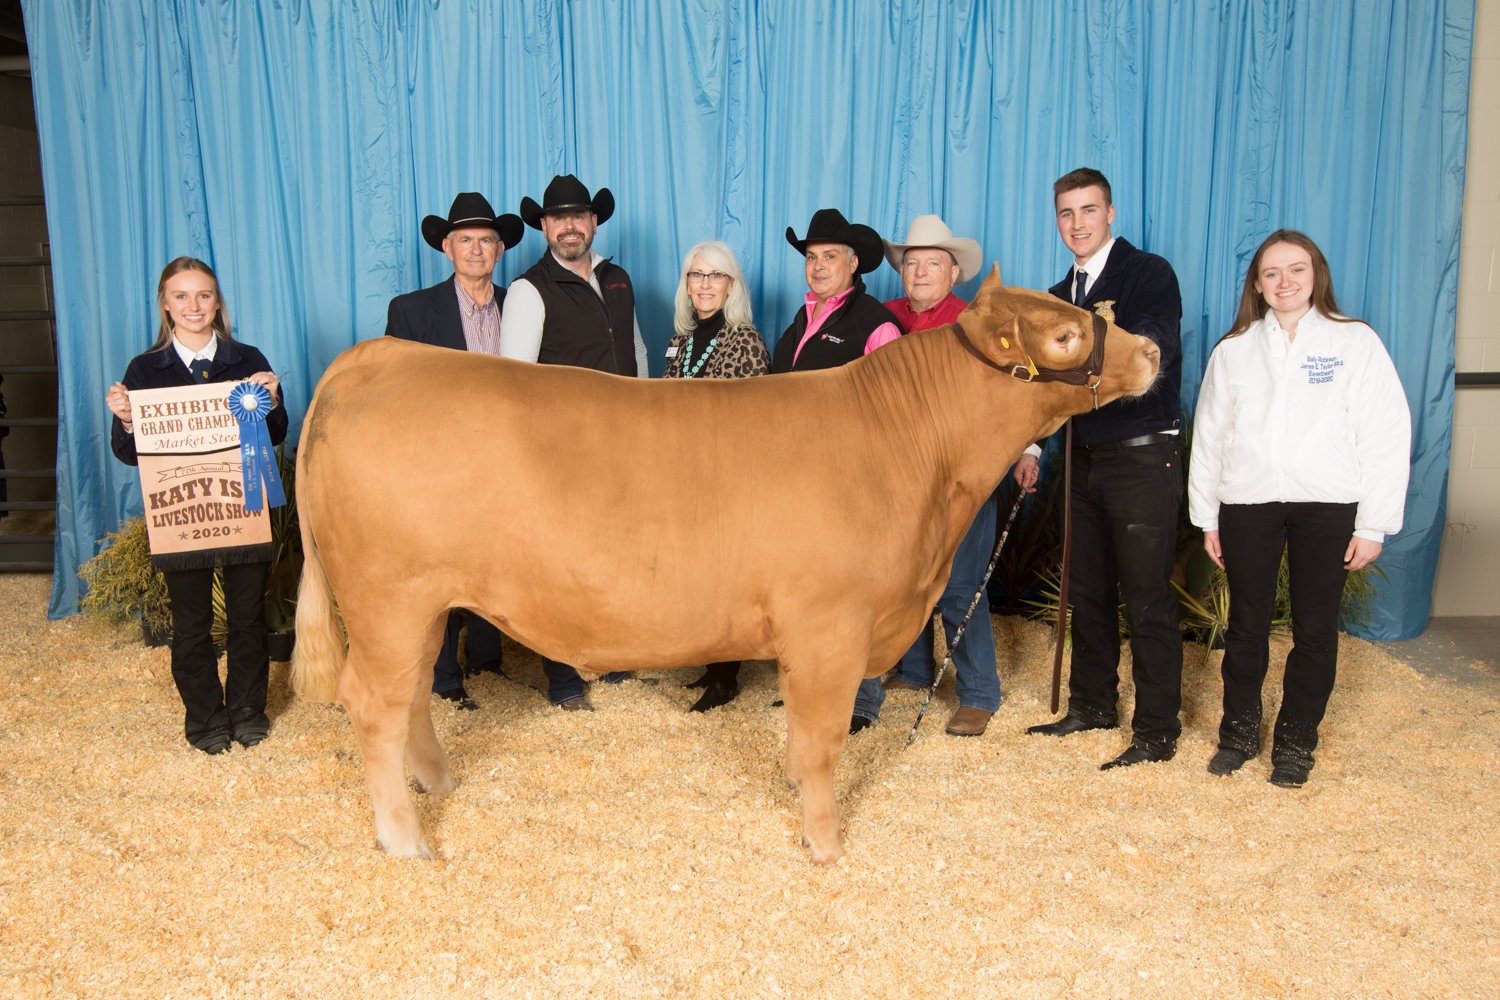 Cattle such as this, from the 2020 Katy ISD FFA Livestock Show, will be among the man attractions at this year’s show, which coincides with the Katy Rodeo.